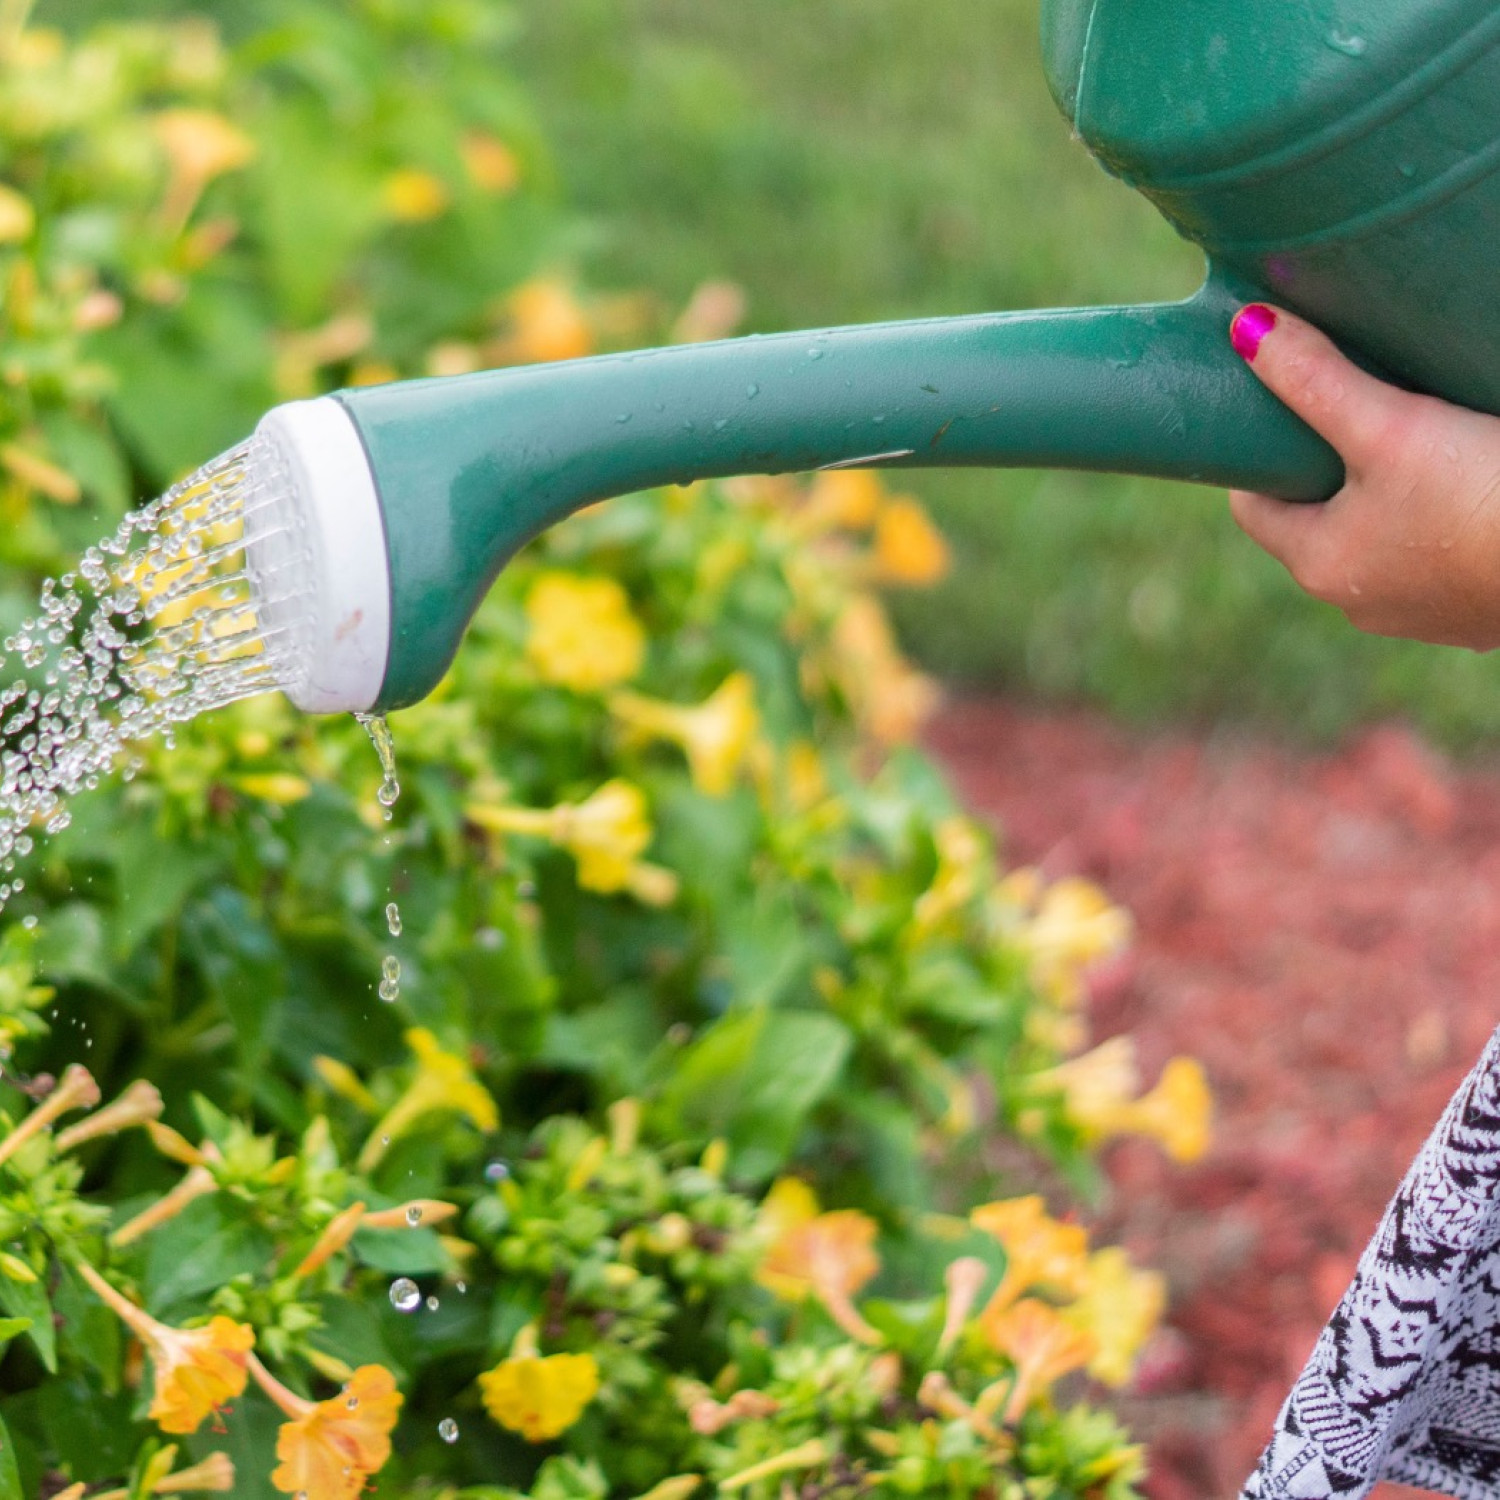 A green watering can is used to water flowers in a garden.